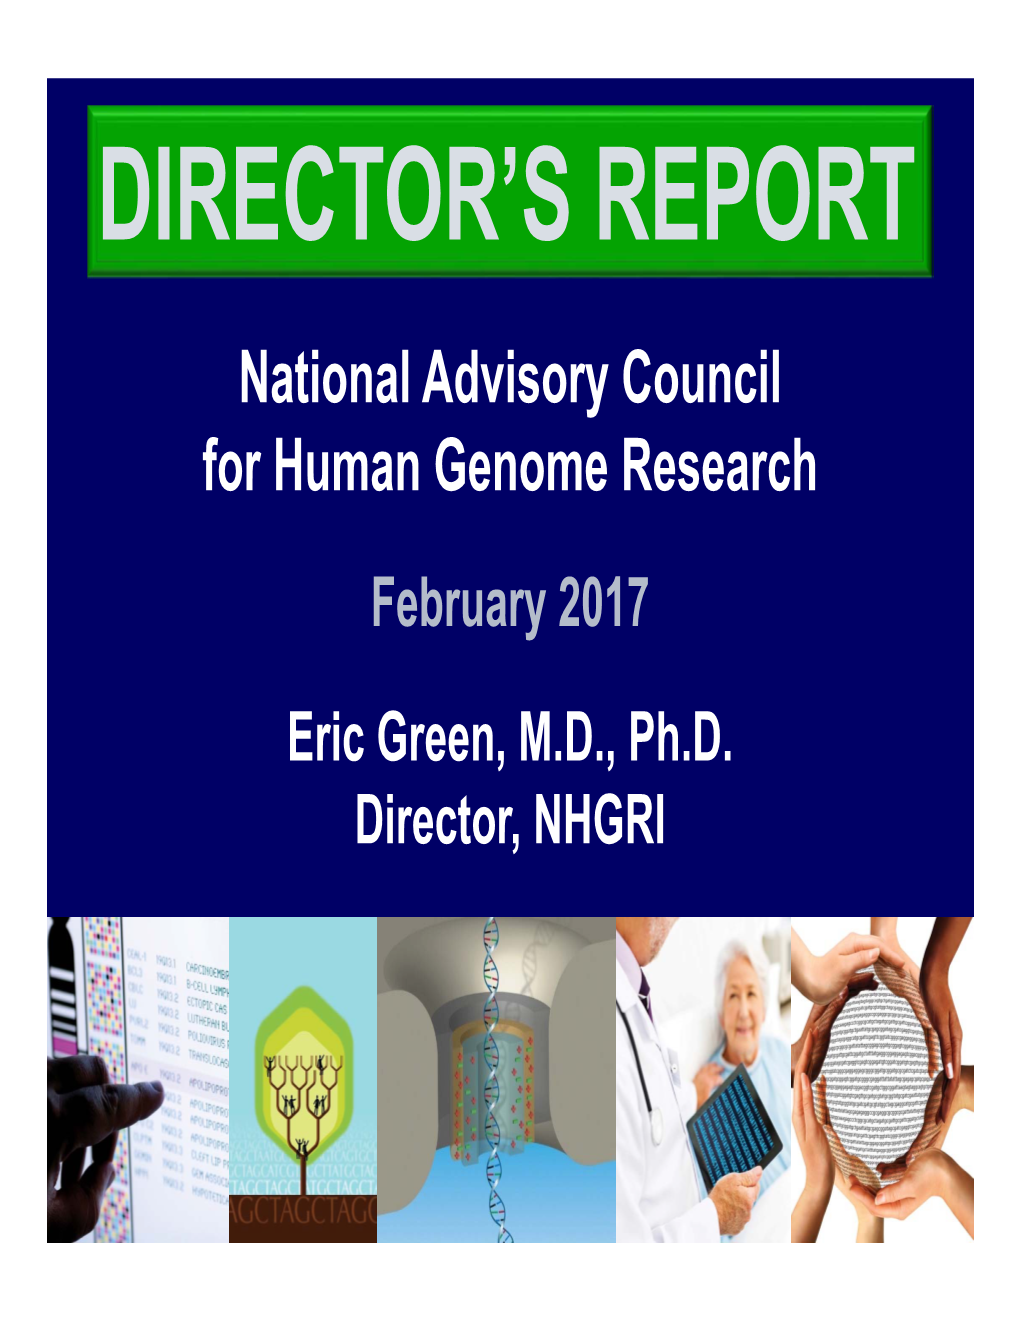 Director's Report to February NACHGR Meeting